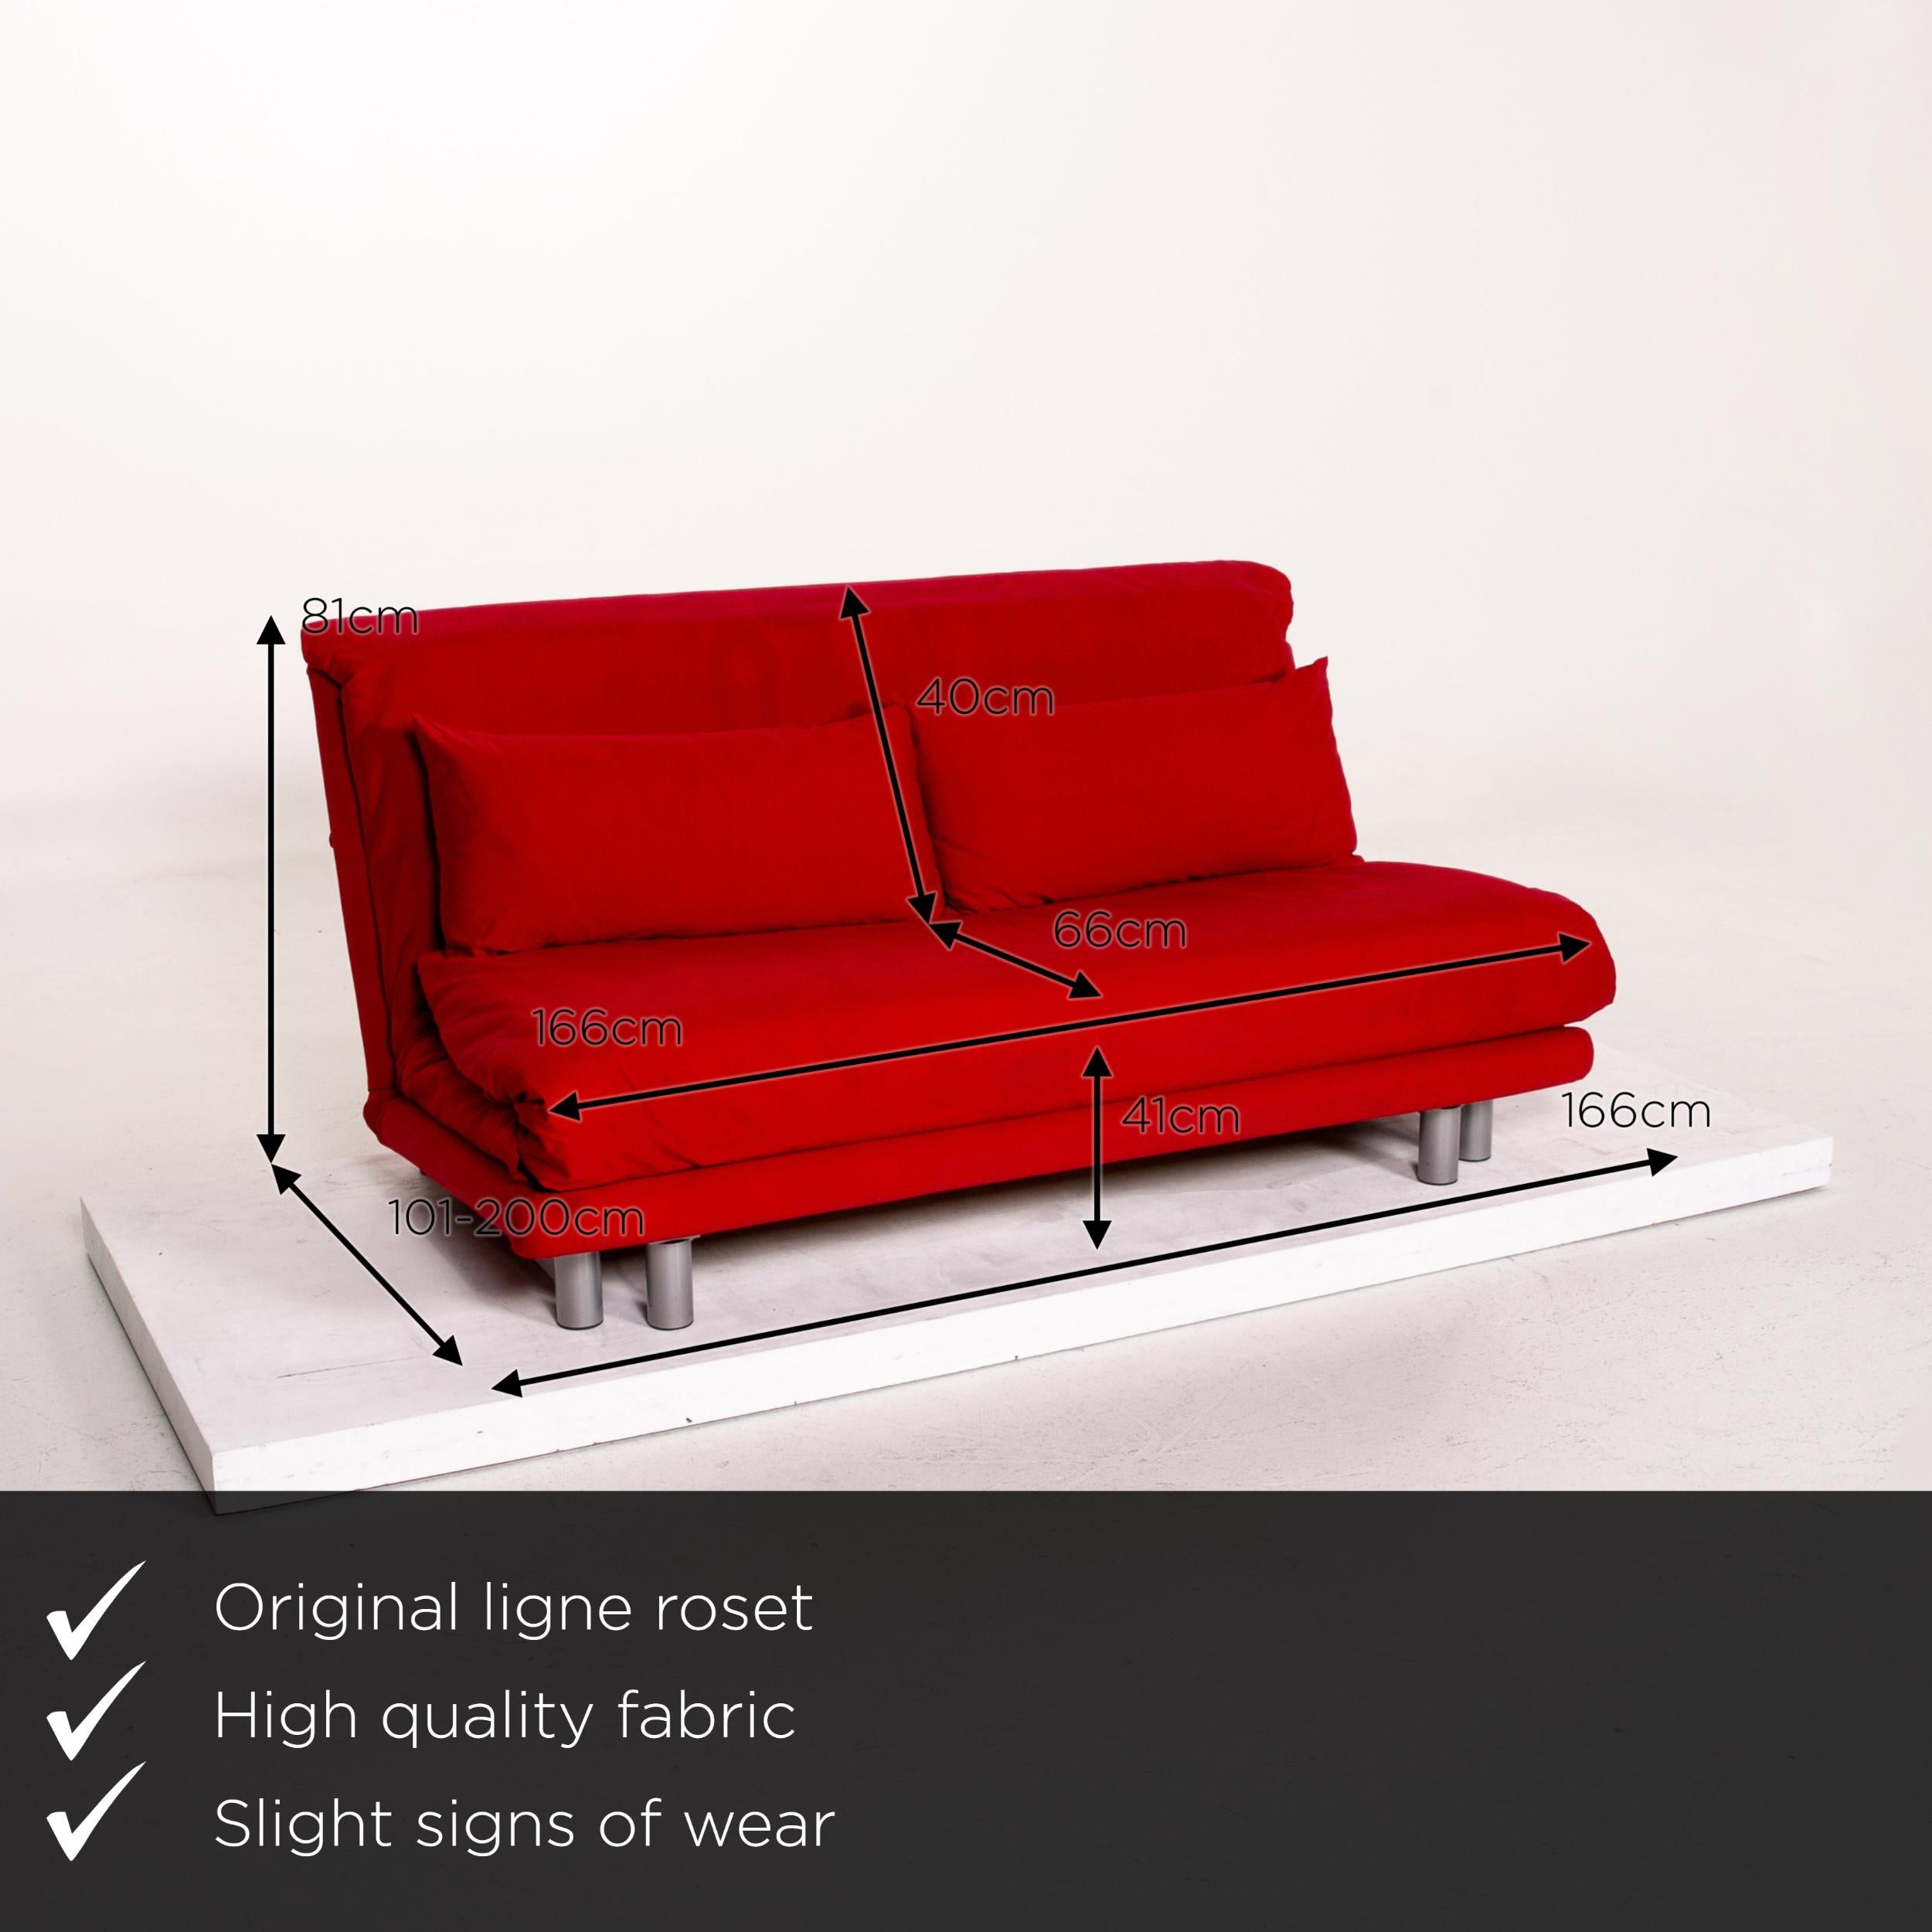 We present to you a ligne roset Multy fabric sofa bed red sofa three-seater function sleeping.
 

 Product measurements in centimeters:
 

Depth 101
Width 166
Height 81
Seat height 41
Seat depth 66
Seat width 166
Back height 40.
 
 